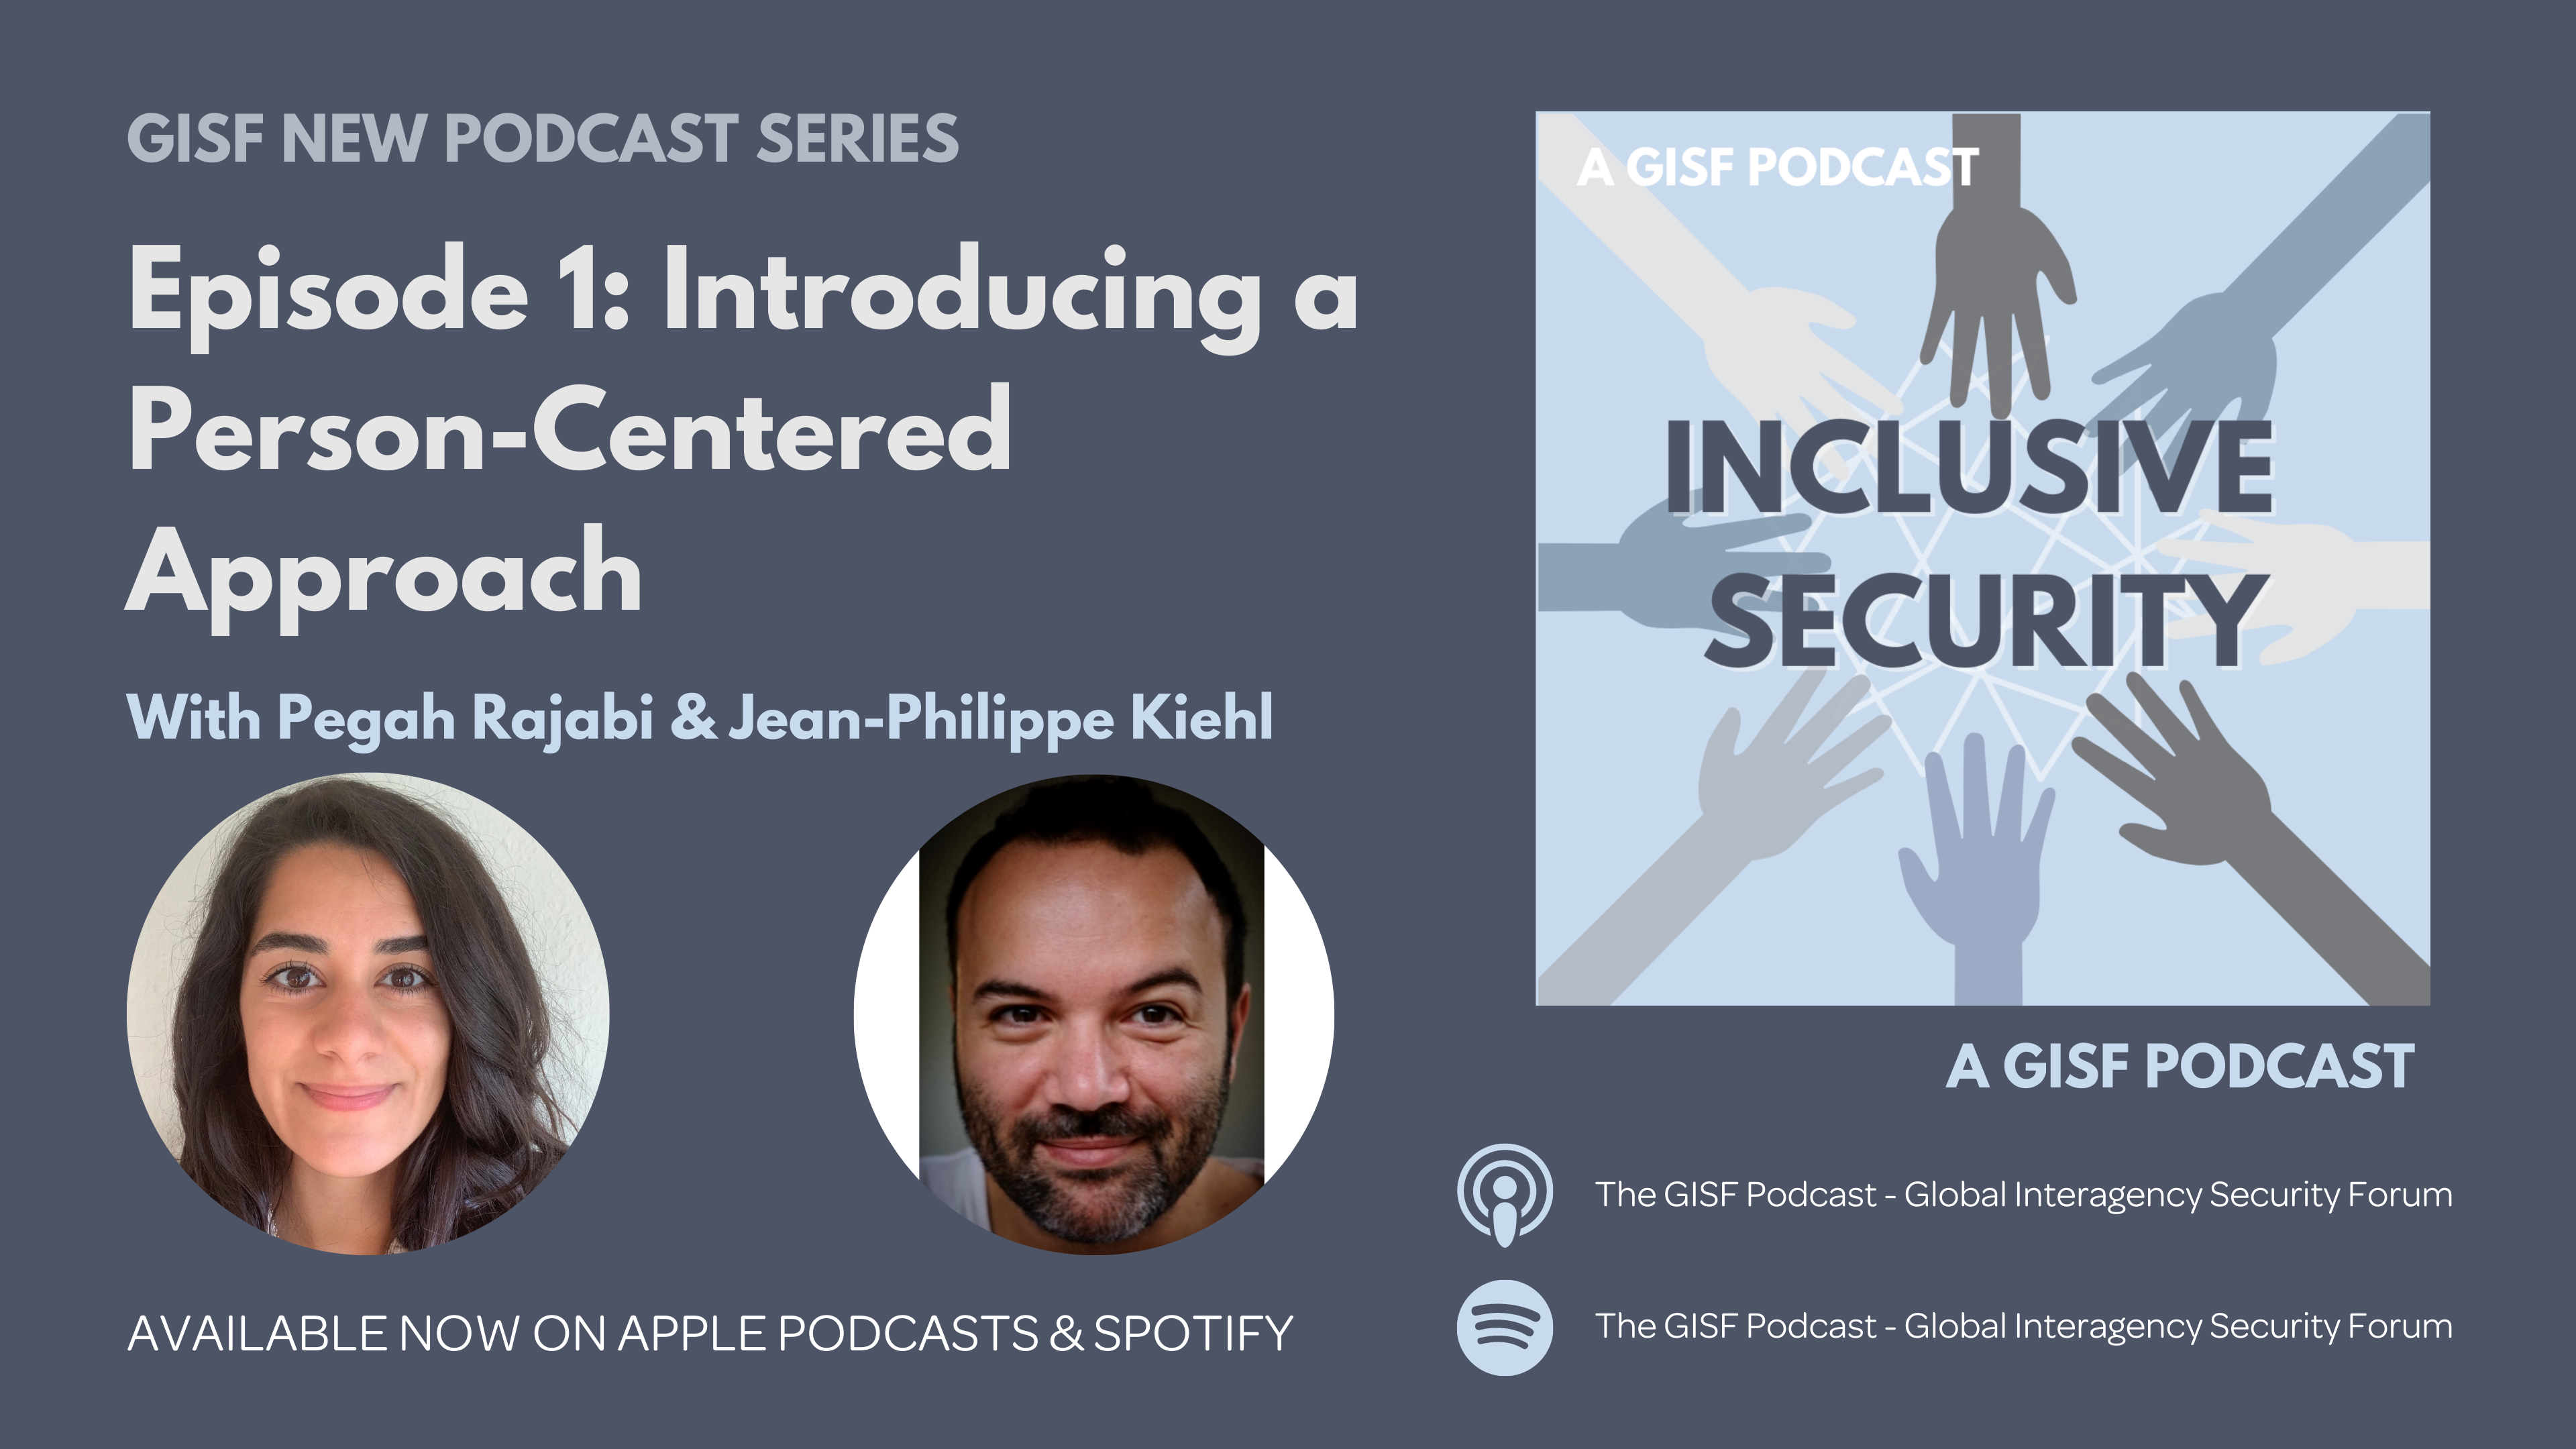 GISF Podcast | Inclusive Security E1: Introducing a Person-Centered Approach